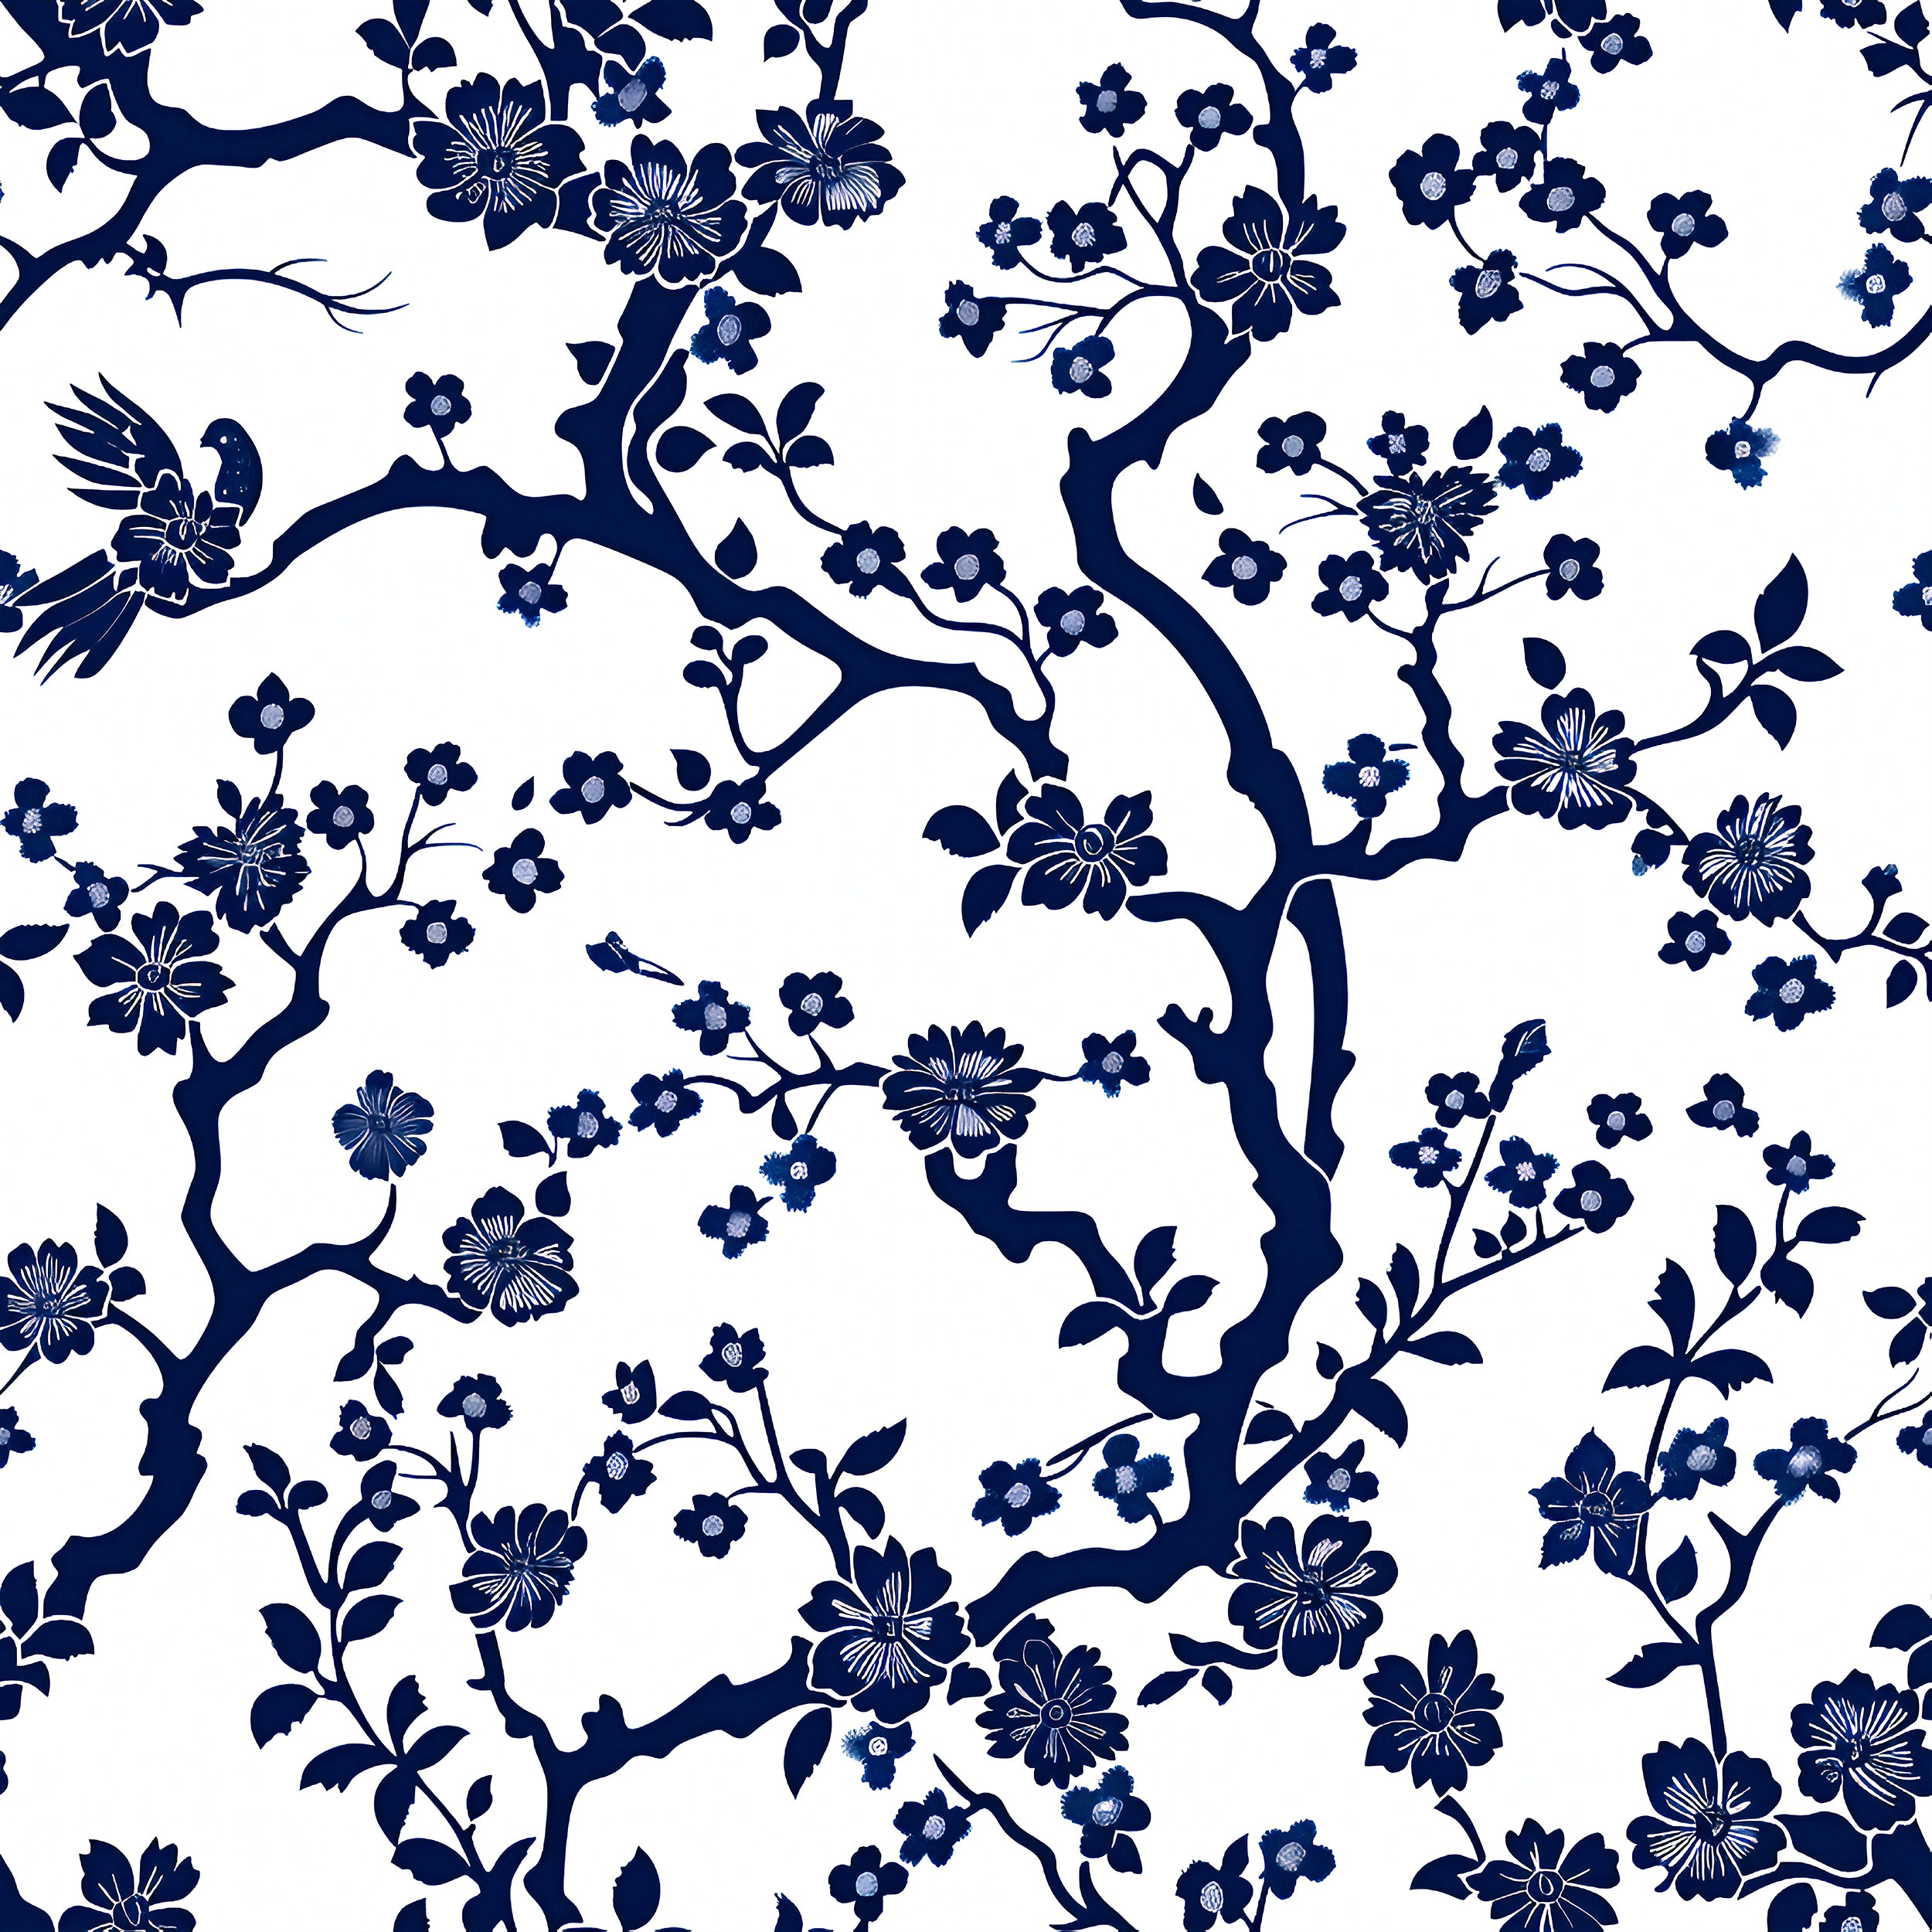 Blue and White Floral Wallpaper, Peel and Stick French Style Botanical Decor, Small Flowers and Branches Wallpaper, Removable Blue Floral